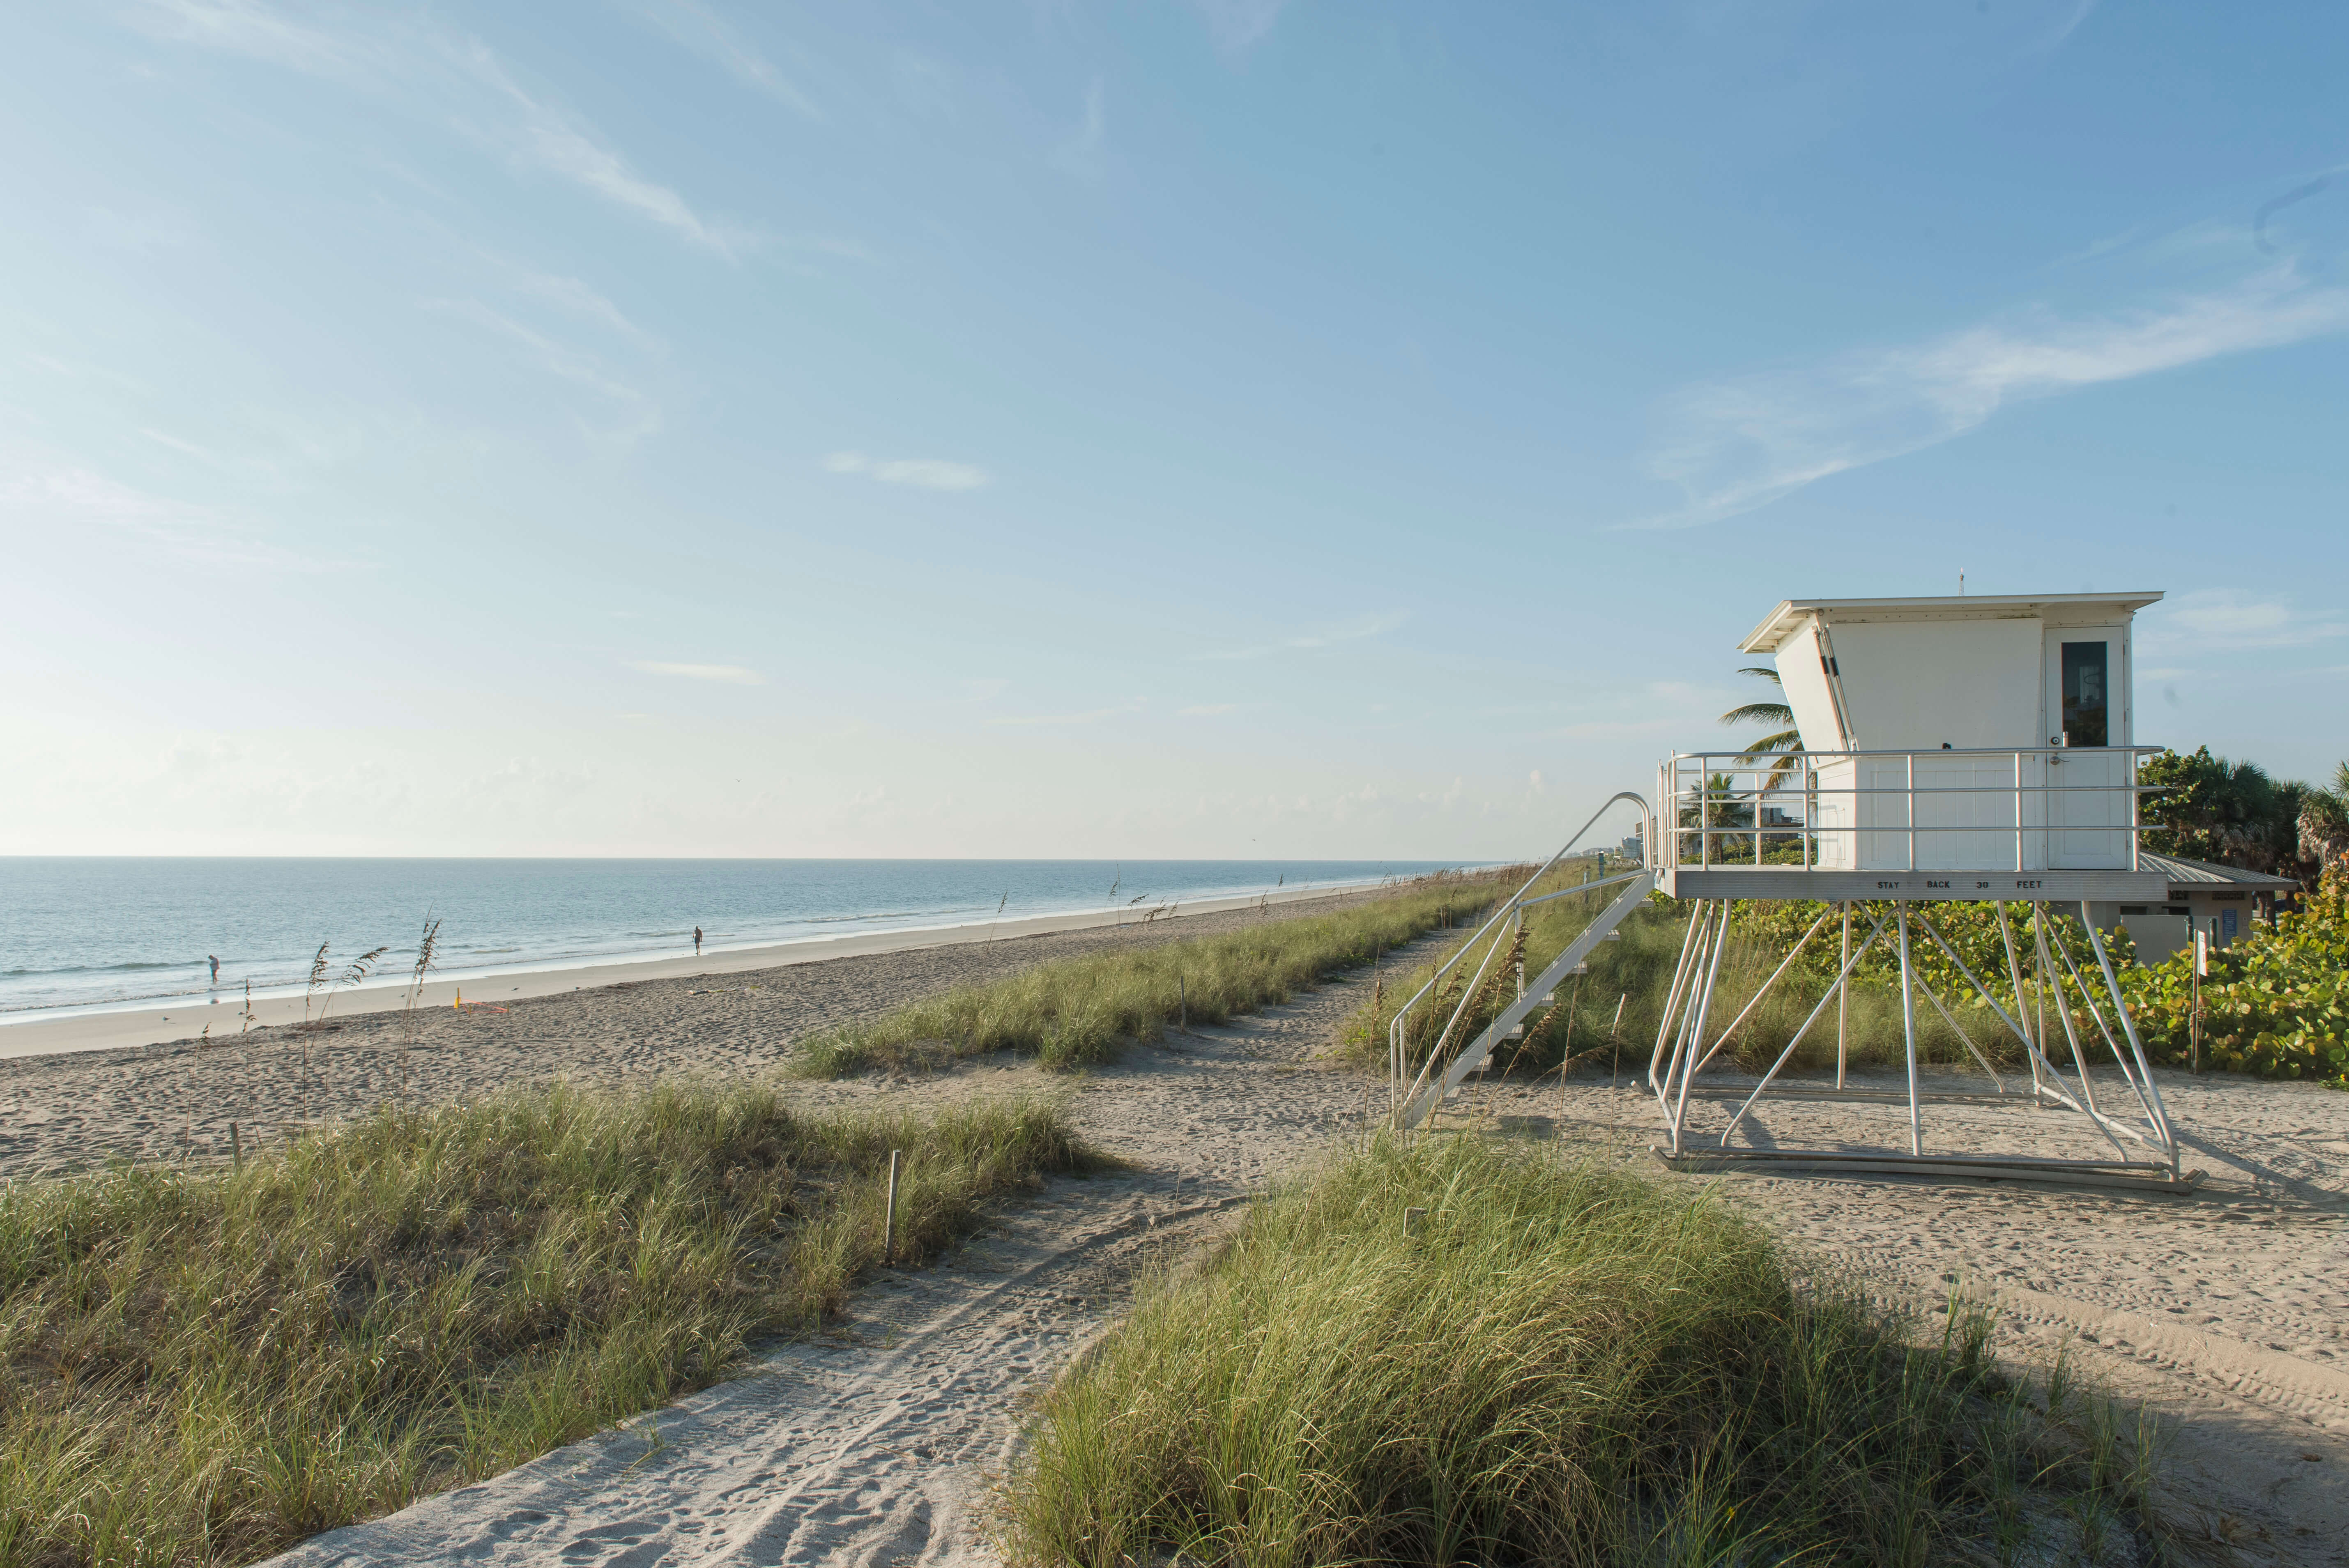 A South Florida beach with a wooden lifeguard tower | Corcoran